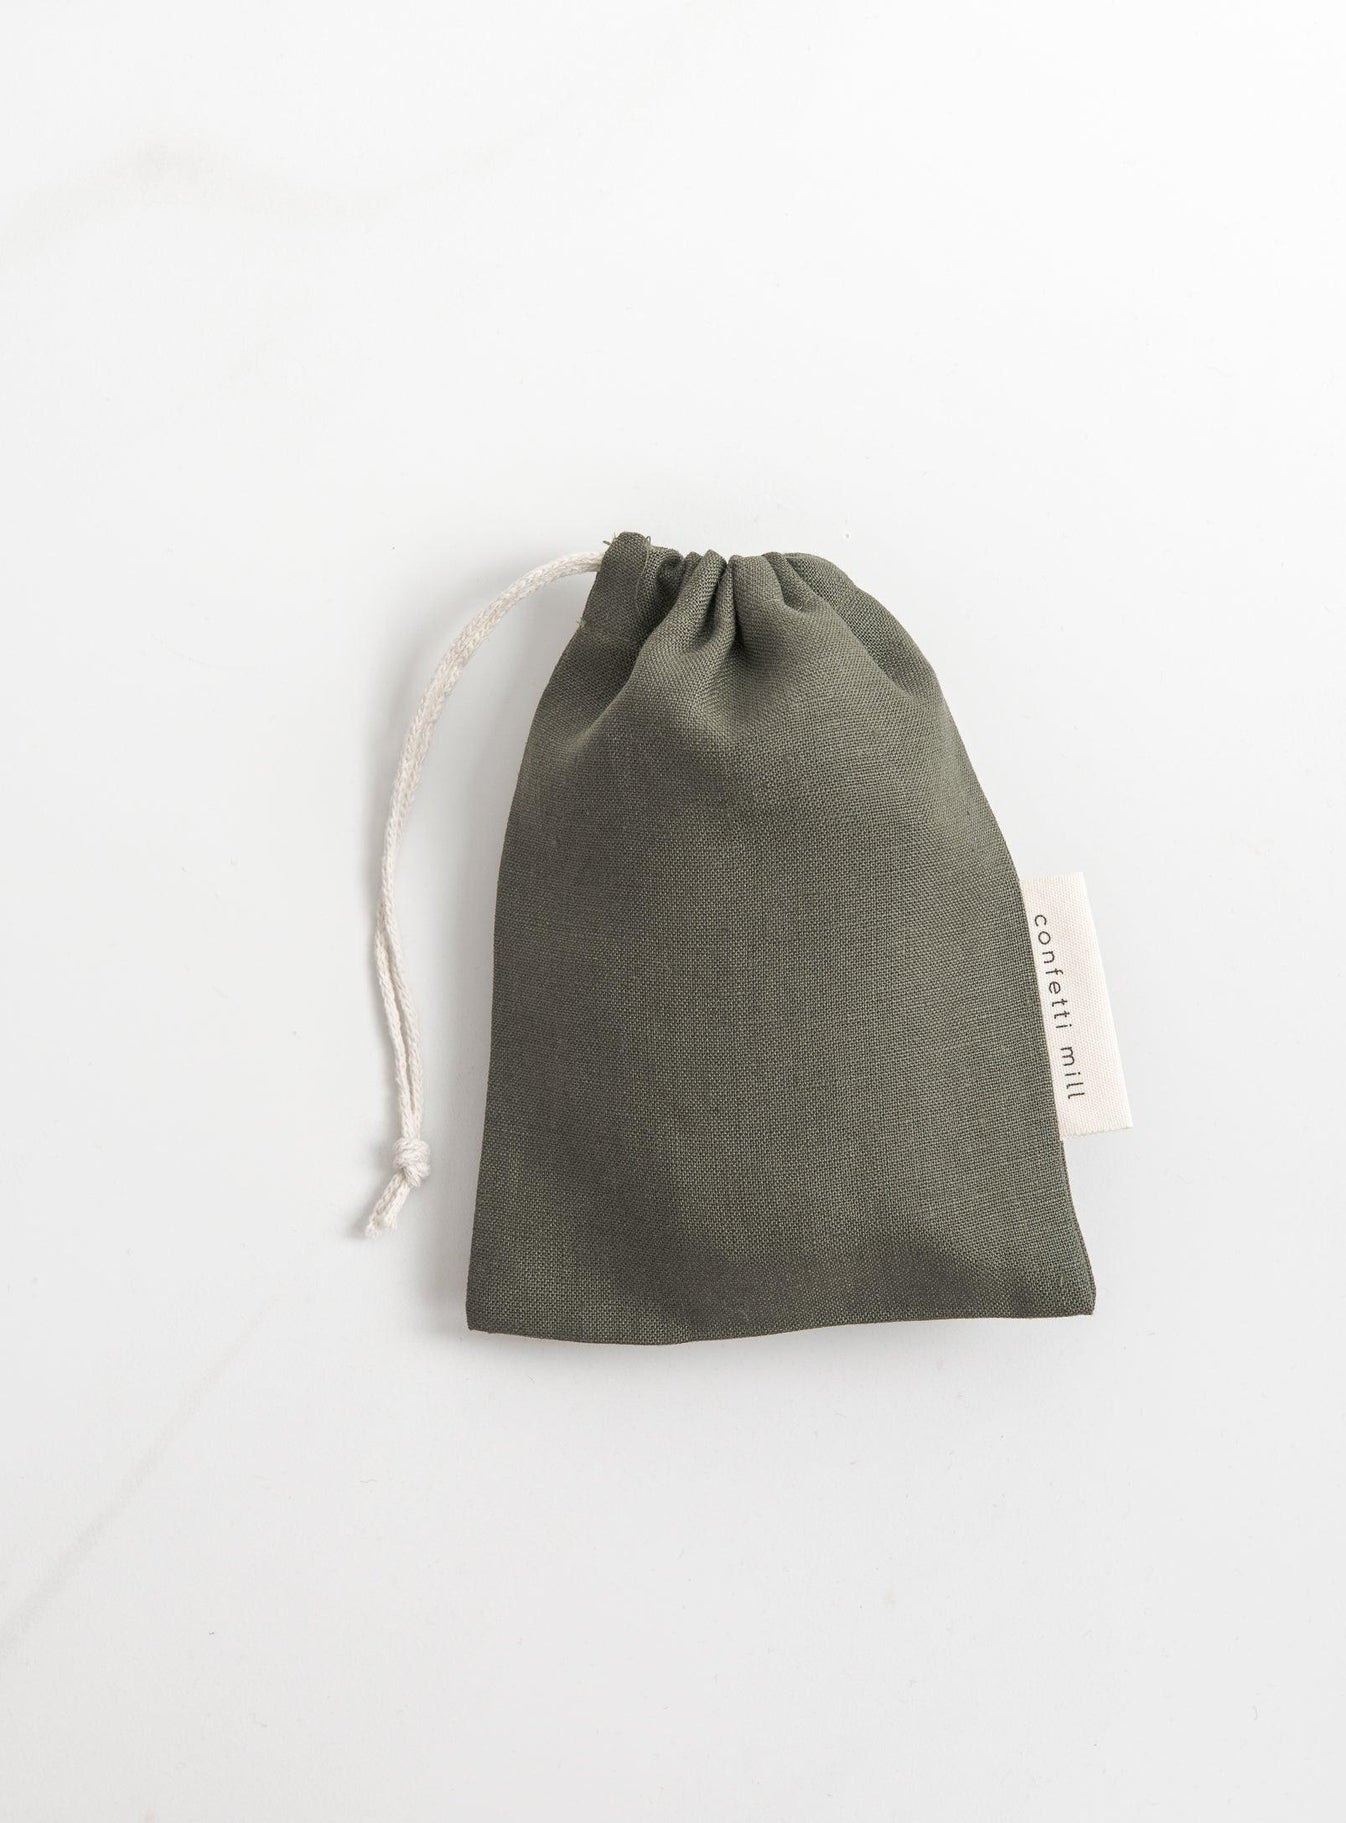 Set of 4 linen Party bags | Reusable party goods | Confetti Mill - Montreal